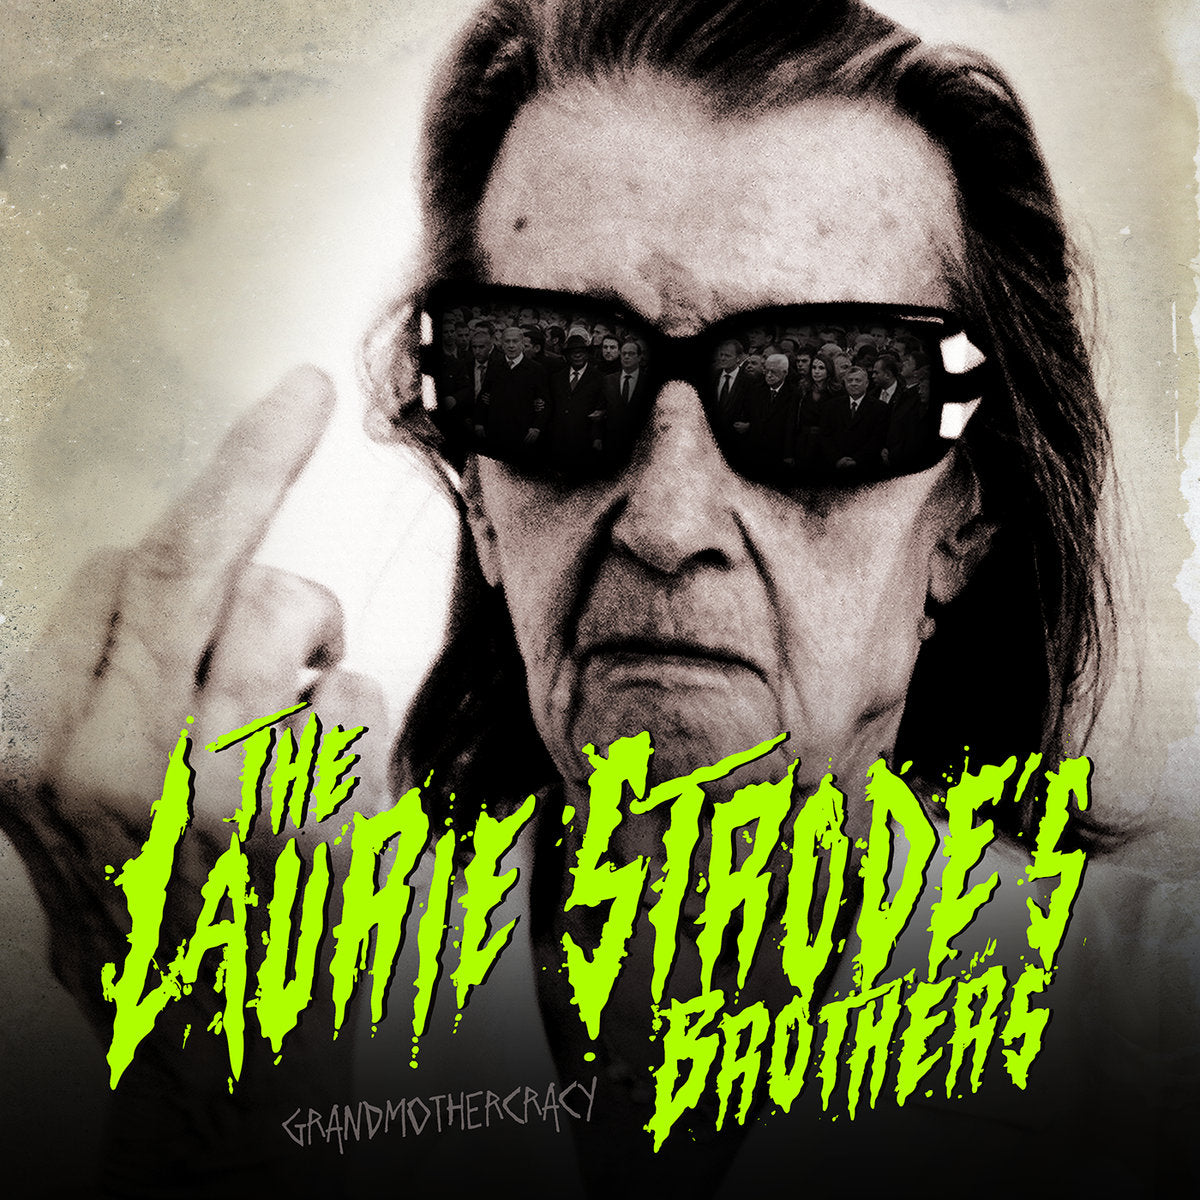 Laurie Strode’s Brothers- Grandmothercracy LP ~HELLSTOMPER!